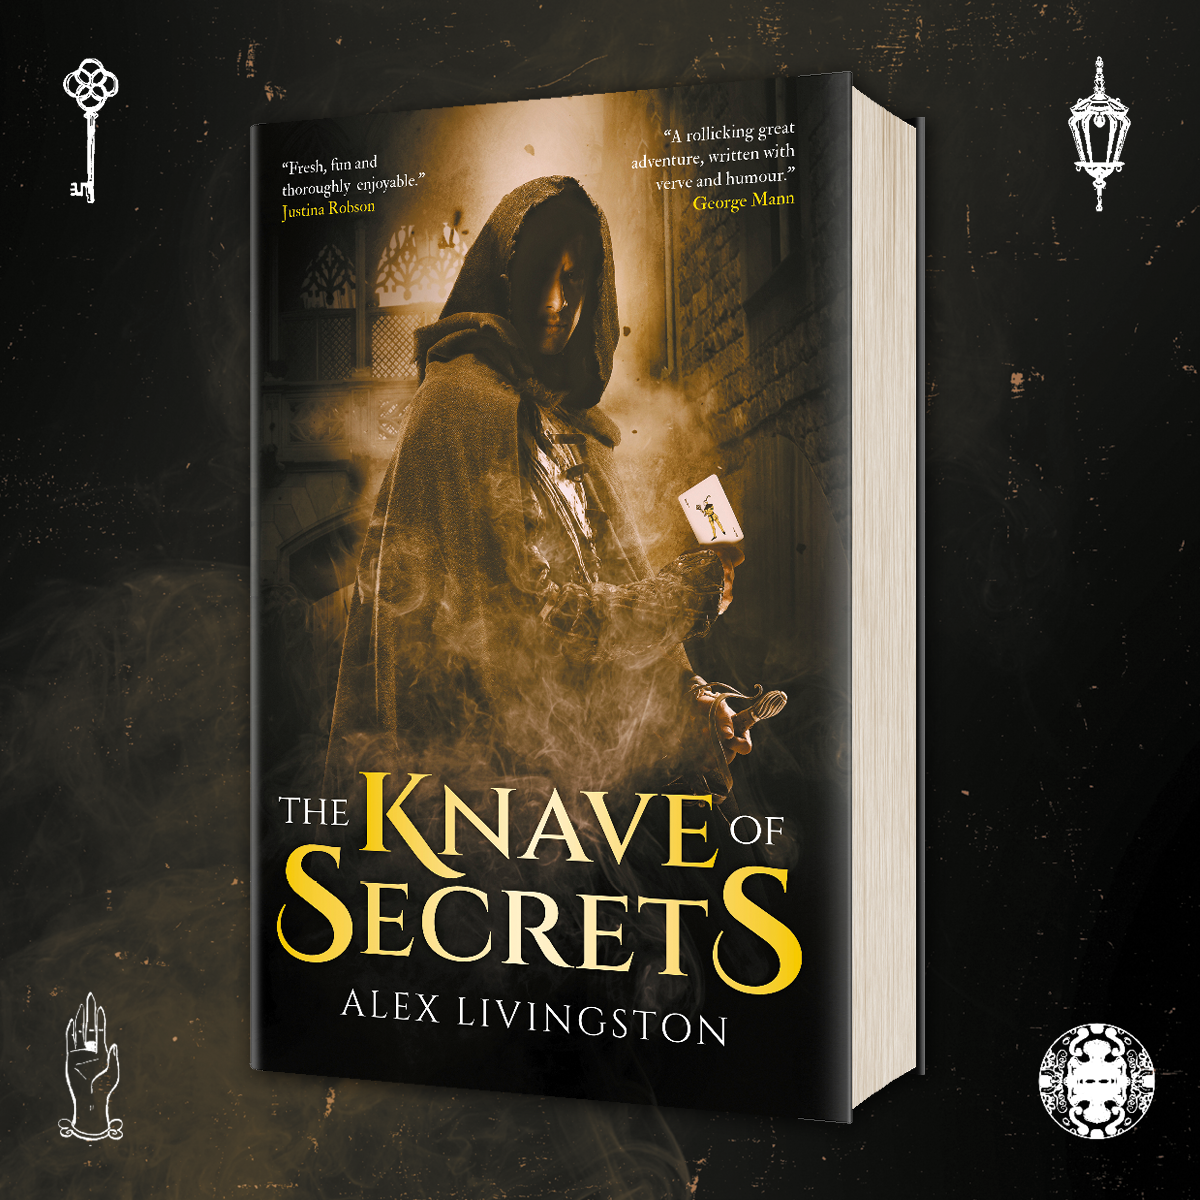 OUT NOW: The Knave of Secrets by Alex Livingston!